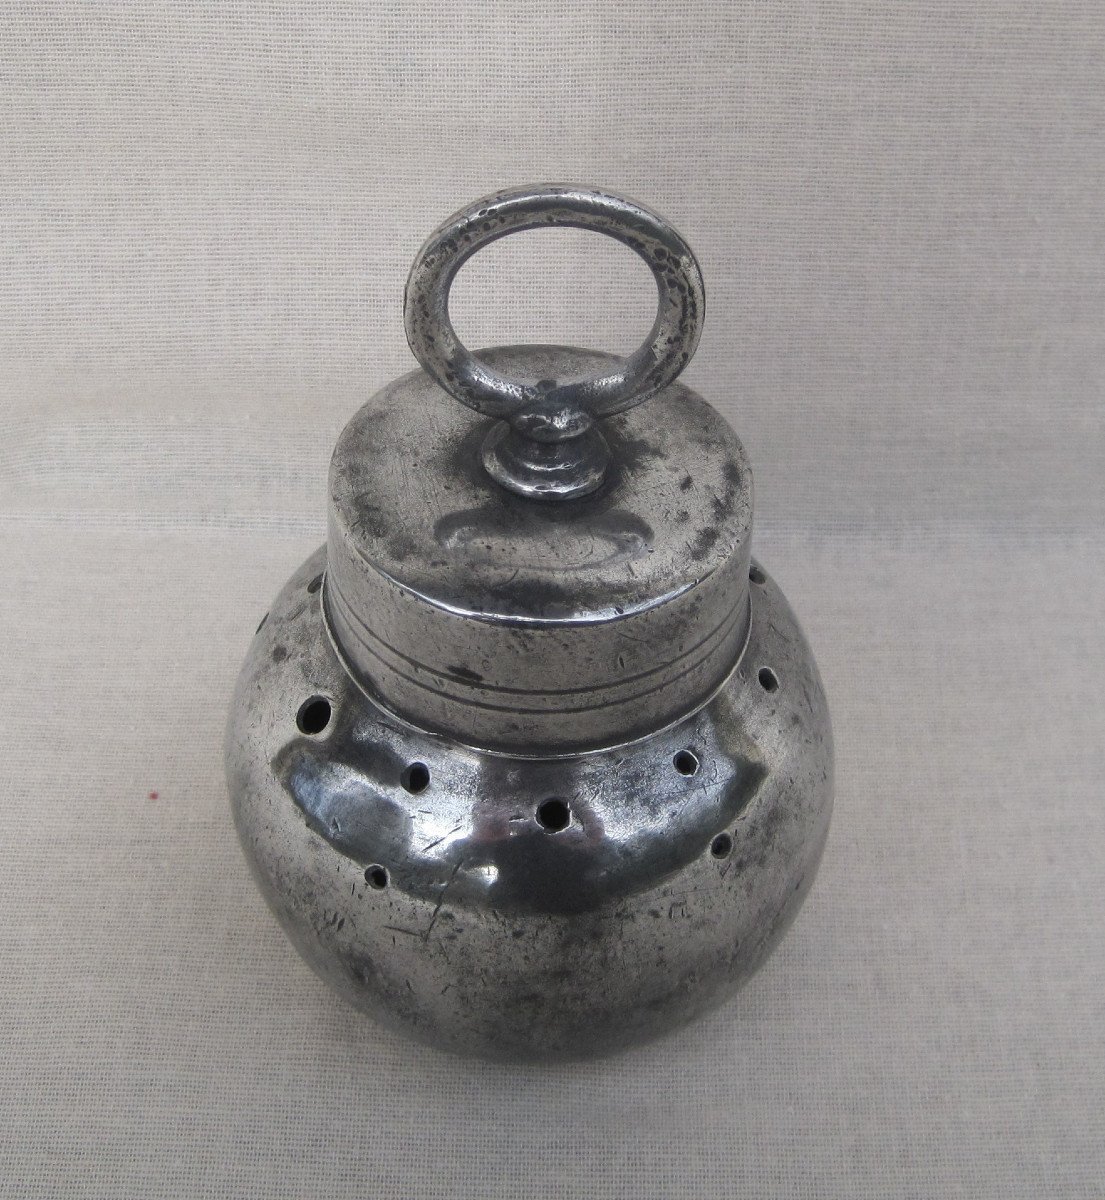 Leeing Ball, In Pewter. Medical Tins. 18th-19th Century.-photo-1